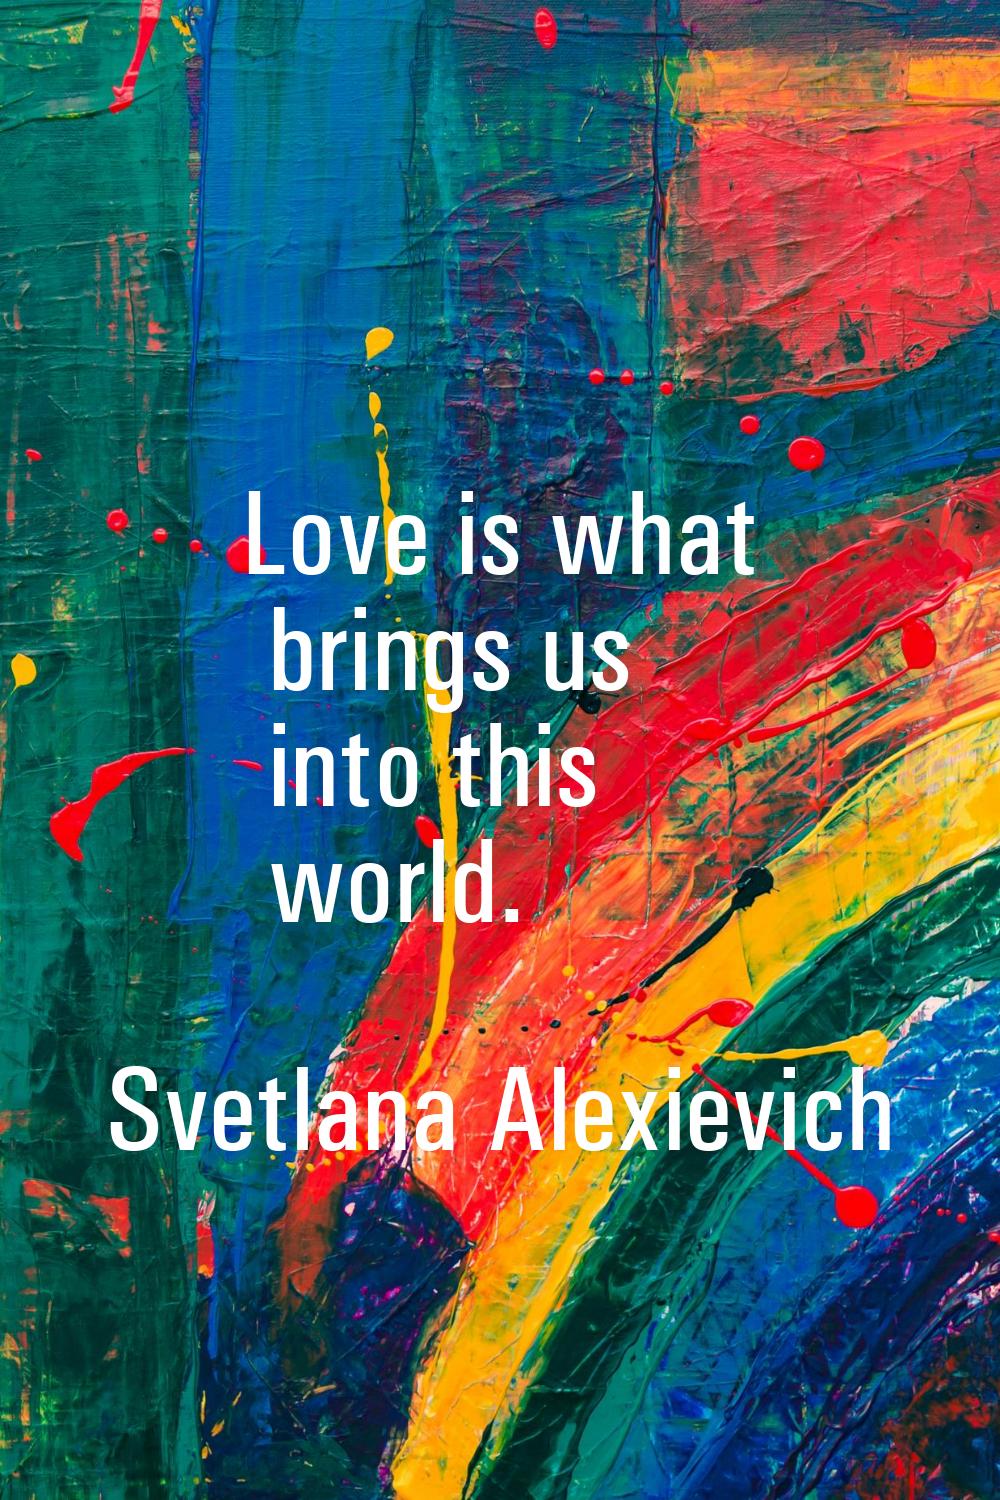 Love is what brings us into this world.